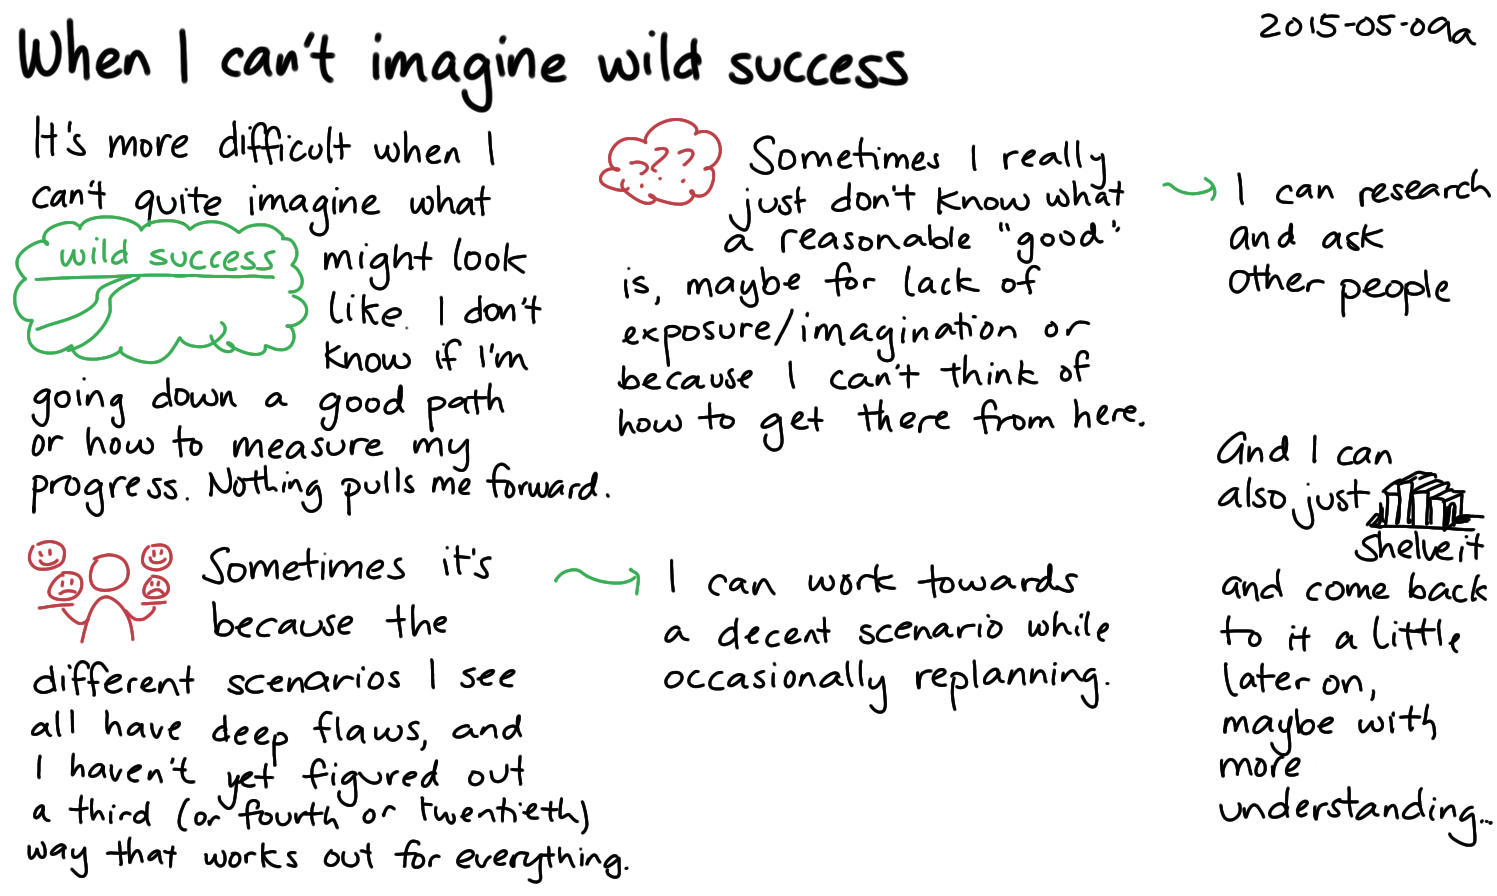 2015-05-09a When I can't imagine wild success -- index card #vision.png